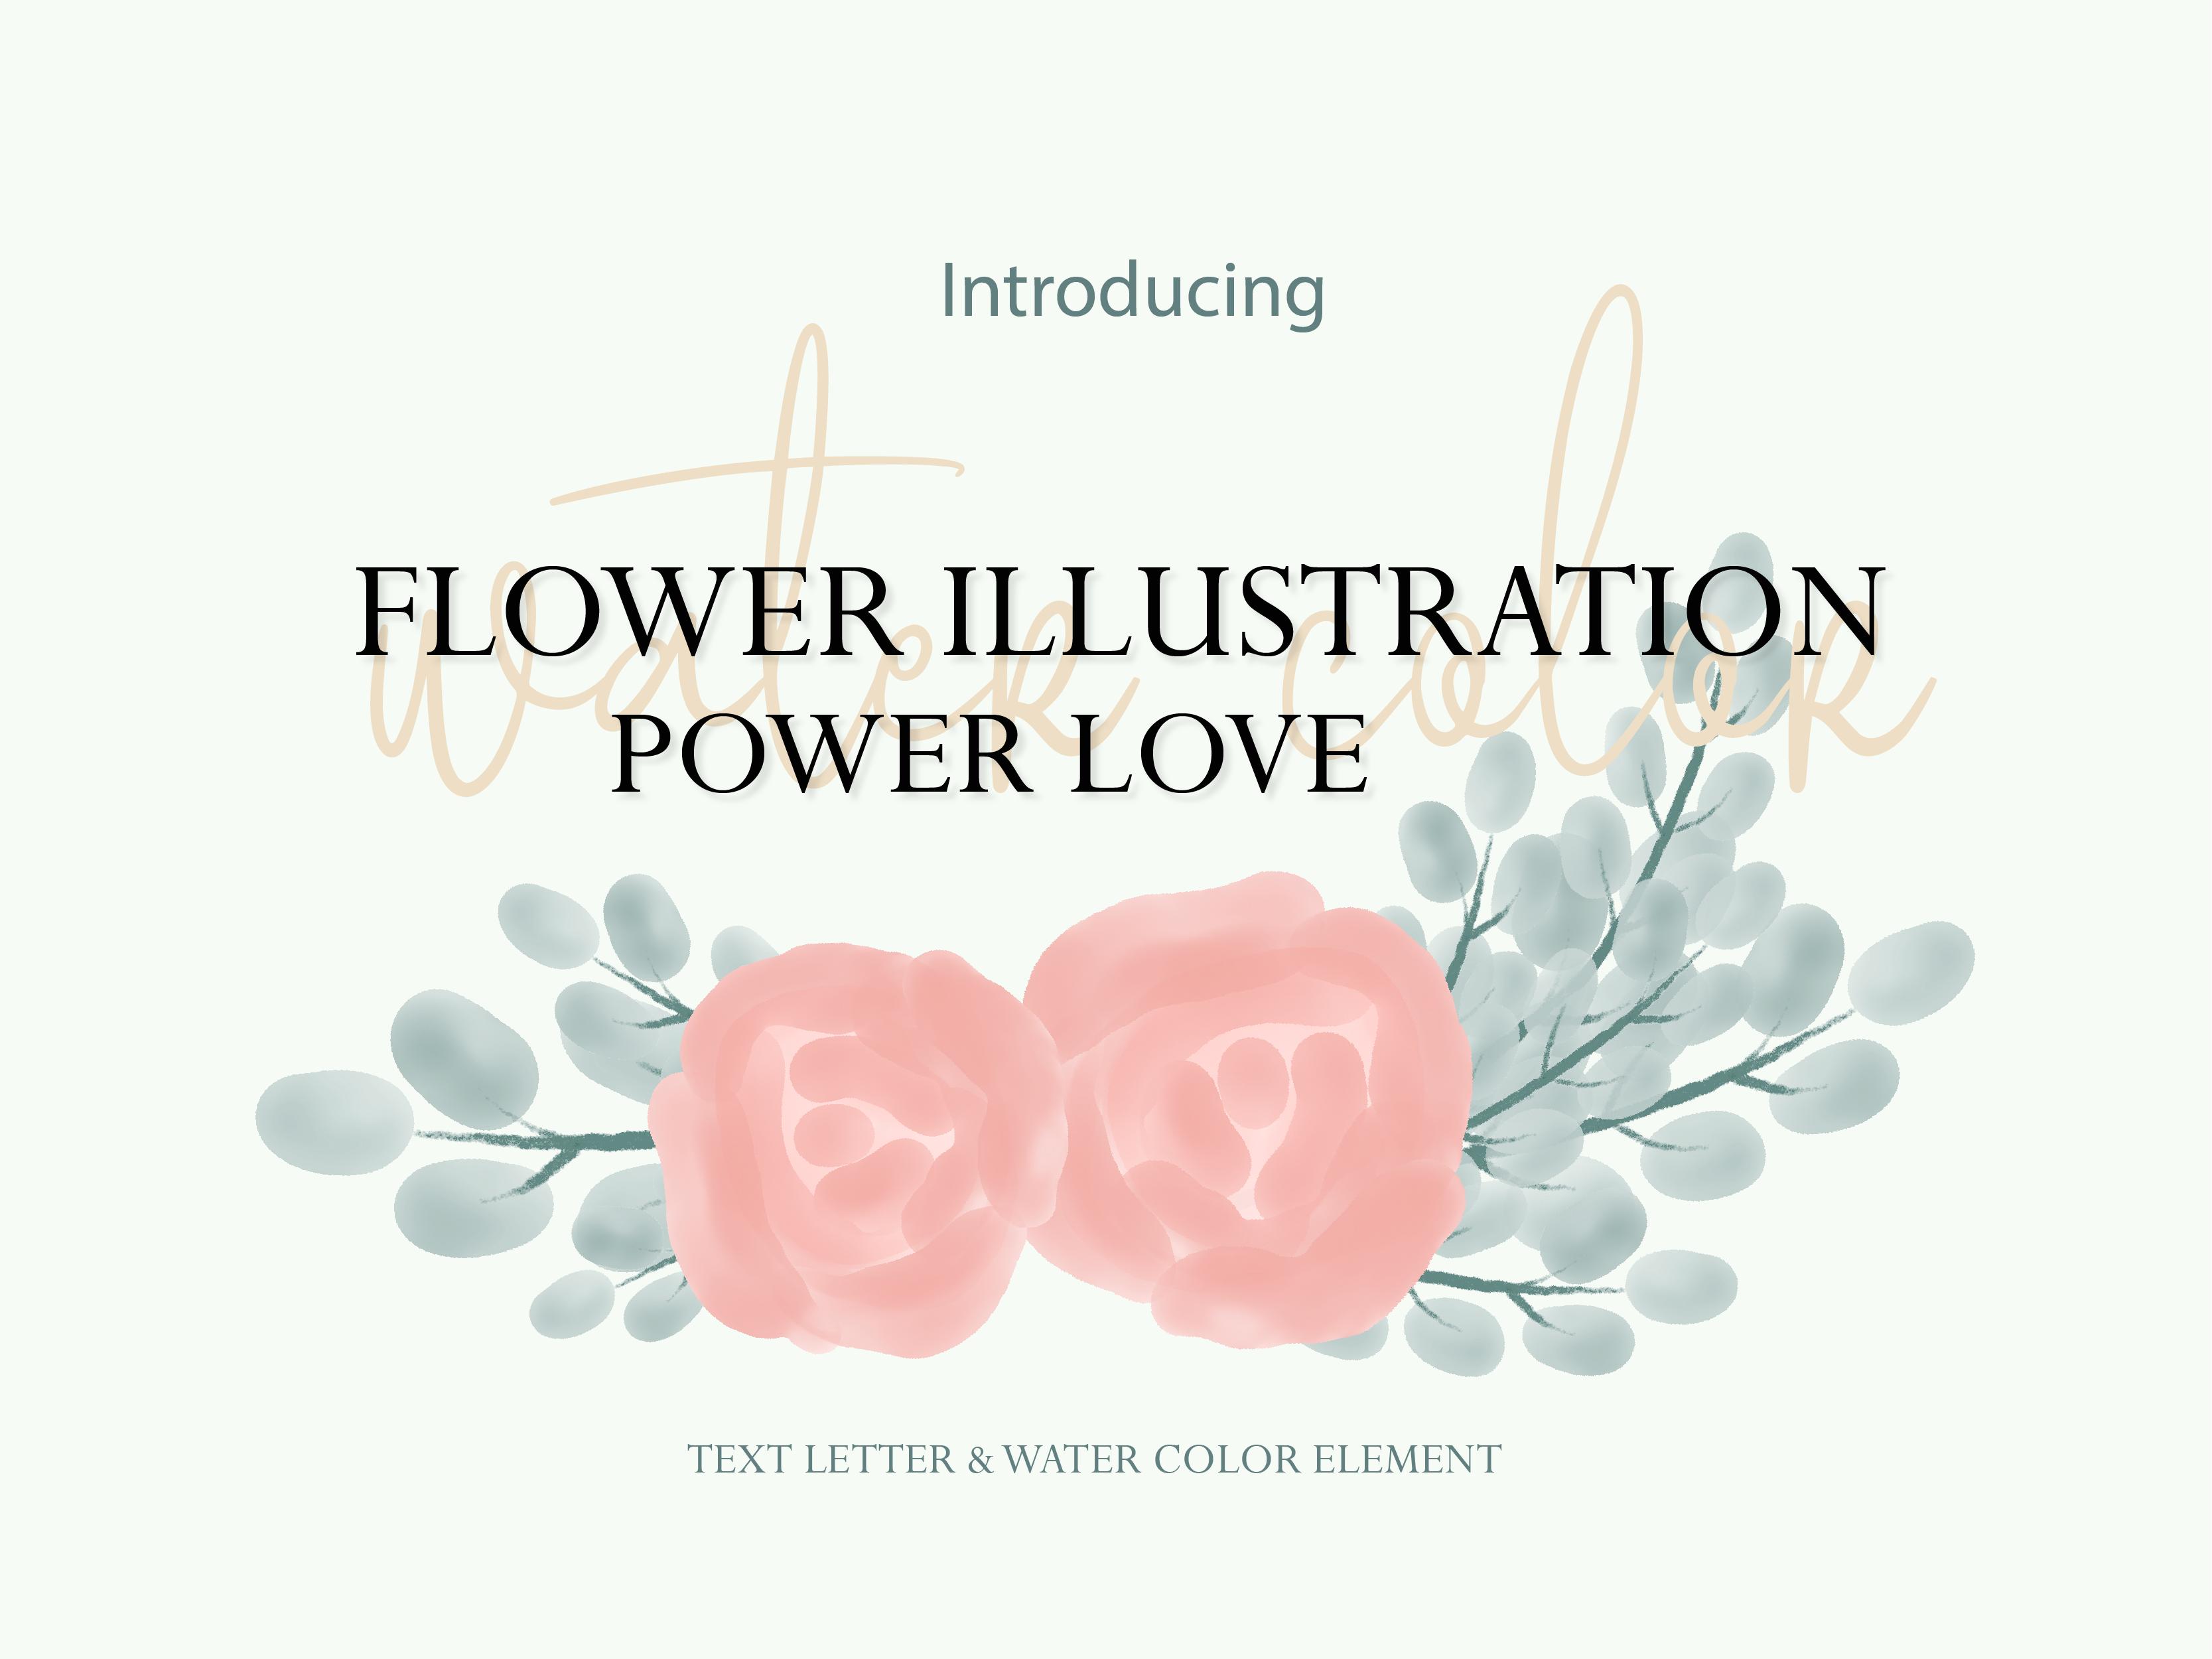 Flower Illustration with Text Letter